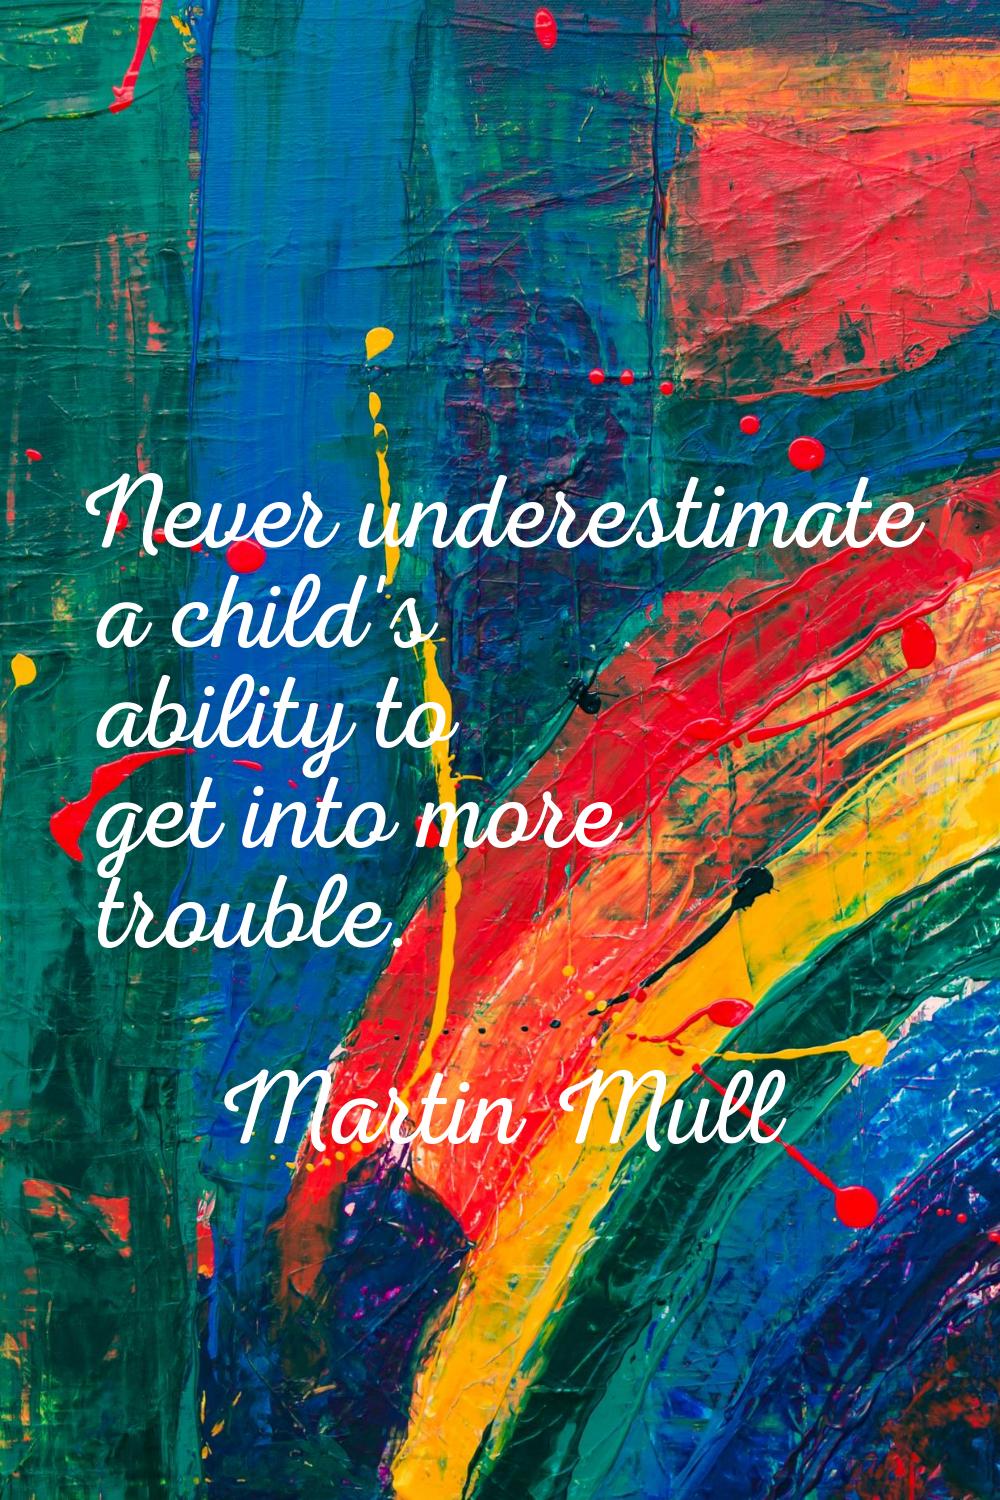 Never underestimate a child's ability to get into more trouble.